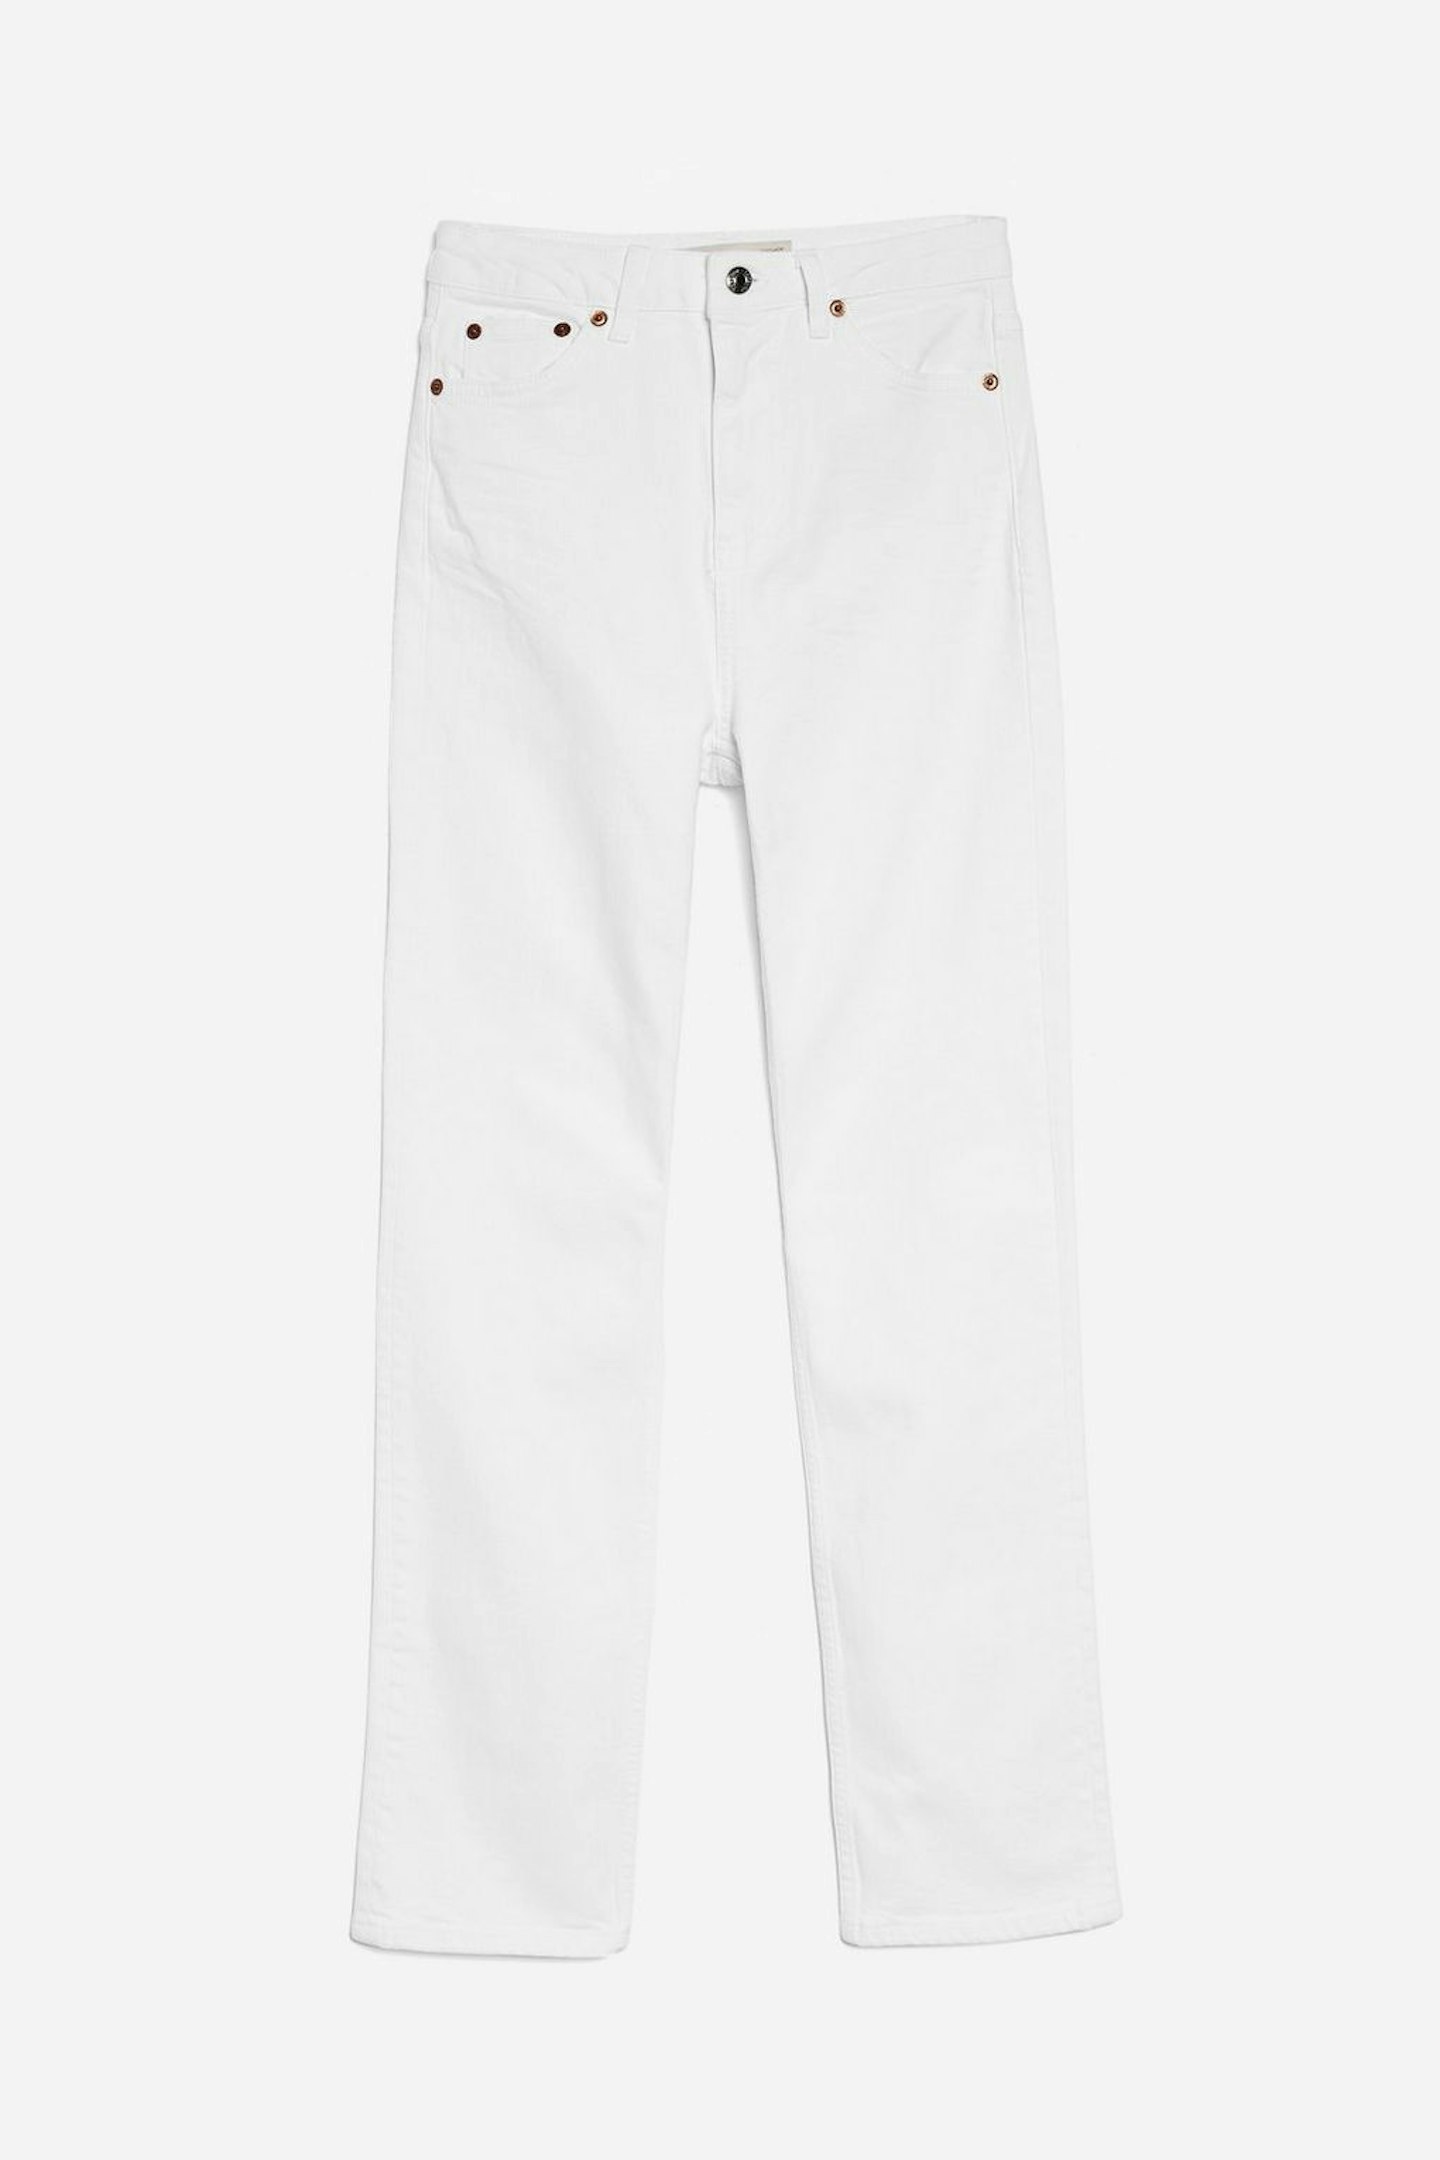 What to wear to 4 day week work topshop moto straight leg jeans